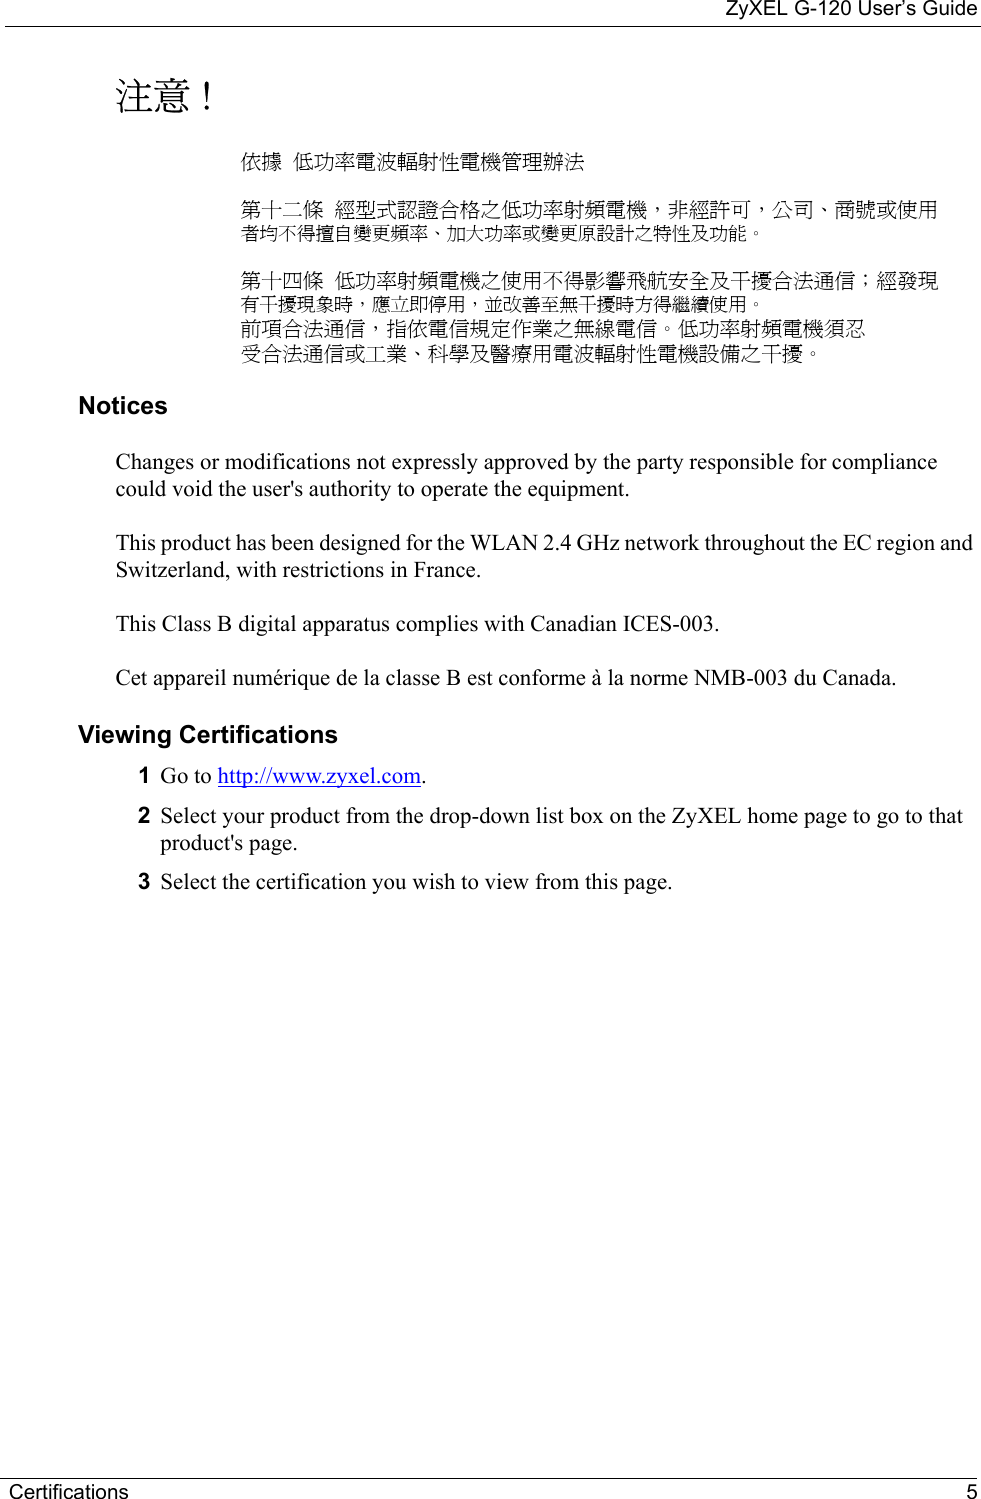 ZyXEL G-120 User’s GuideCertifications 5注意 !依據  低功率電波輻射性電機管理辦法第十二條  經型式認證合格之低功率射頻電機，非經許可，公司、商號或使用者均不得擅自變更頻率、加大功率或變更原設計之特性及功能。第十四條  低功率射頻電機之使用不得影響飛航安全及干擾合法通信；經發現有干擾現象時，應立即停用，並改善至無干擾時方得繼續使用。前項合法通信，指依電信規定作業之無線電信。低功率射頻電機須忍受合法通信或工業、科學及醫療用電波輻射性電機設備之干擾。 Notices Changes or modifications not expressly approved by the party responsible for compliance could void the user&apos;s authority to operate the equipment.This product has been designed for the WLAN 2.4 GHz network throughout the EC region and Switzerland, with restrictions in France. This Class B digital apparatus complies with Canadian ICES-003.Cet appareil numérique de la classe B est conforme à la norme NMB-003 du Canada.Viewing Certifications1Go to http://www.zyxel.com. 2Select your product from the drop-down list box on the ZyXEL home page to go to that product&apos;s page.3Select the certification you wish to view from this page.